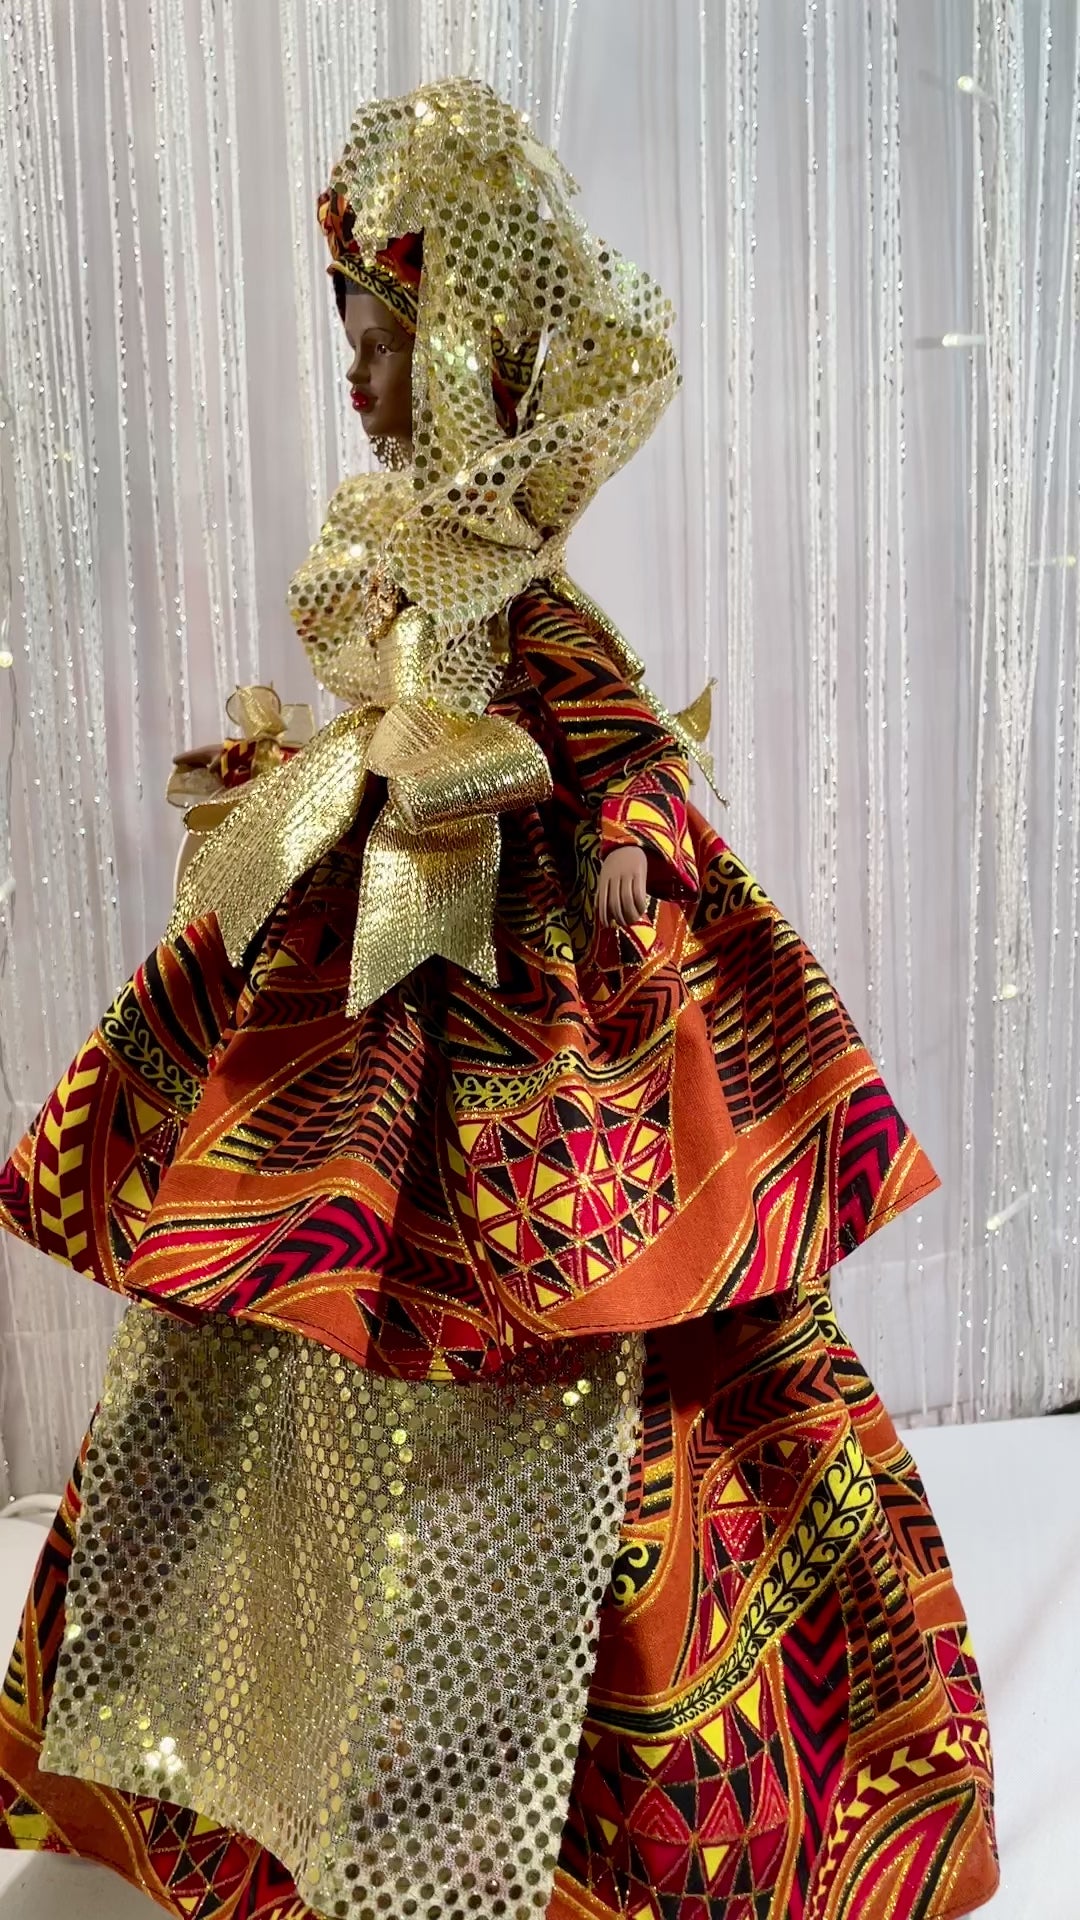 VIDEO OF AN EDUCATED BLACK QUEEN ART DOLL. She is dressed in a two tiered sparkly afrocentric fabric gown. Gold embellishments abound on this Black Queen from the collar to the waist to the draping from under her top tier. This gown is accented with a gold rhinestone cabachon at the bodice. She wears gold rhinestone earrings